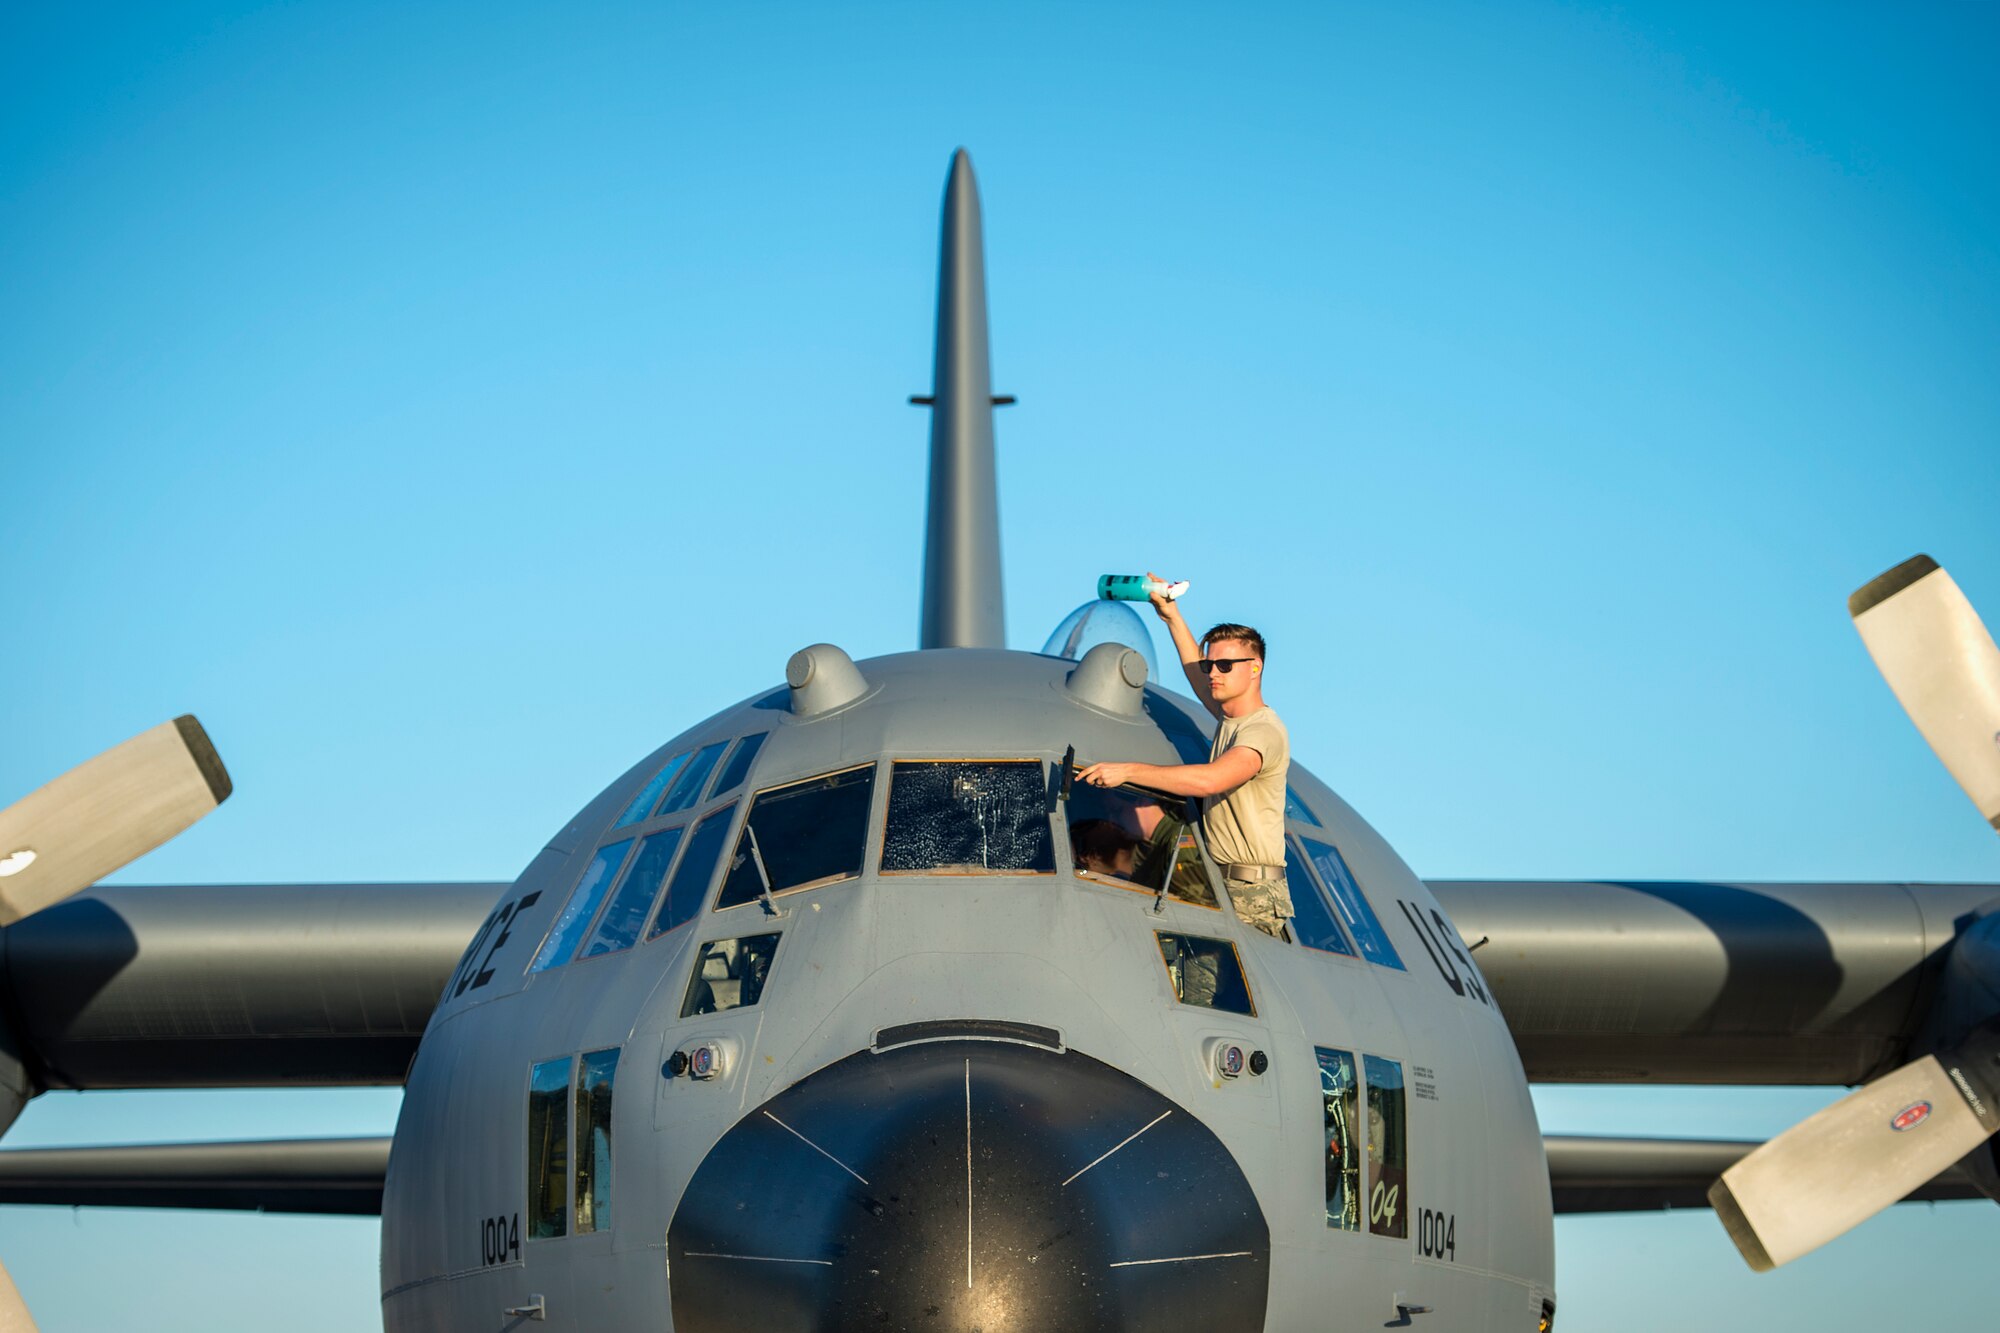 U.S. Air Force Senior Airman Daniel Hall, a crew chief from the 133rd Aircraft Maintenance squadron cleans the front window on a C-130 Hercules in Yuma, Ariz. Feb. 28, 2019.